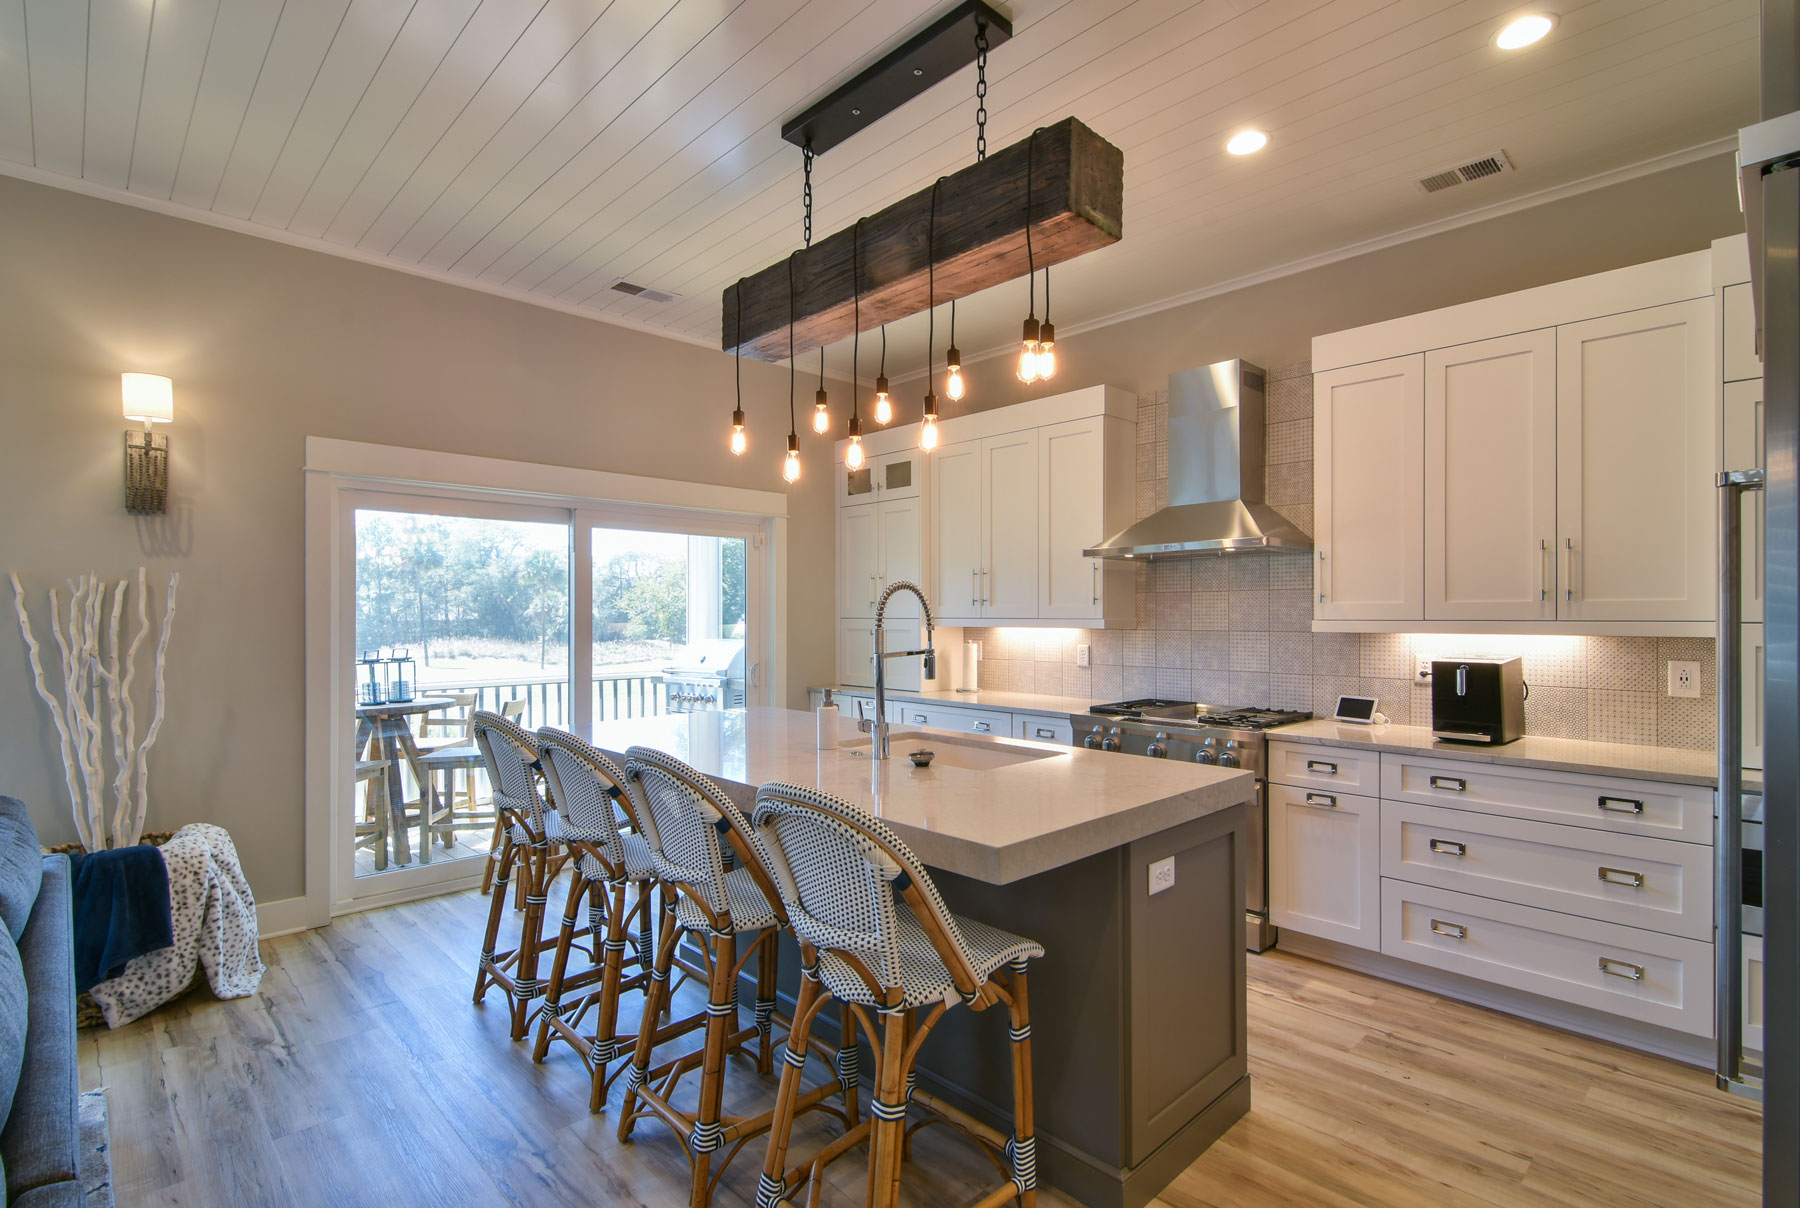 Open plan kitchen and family room, large island. White cabinets, navy blue island.